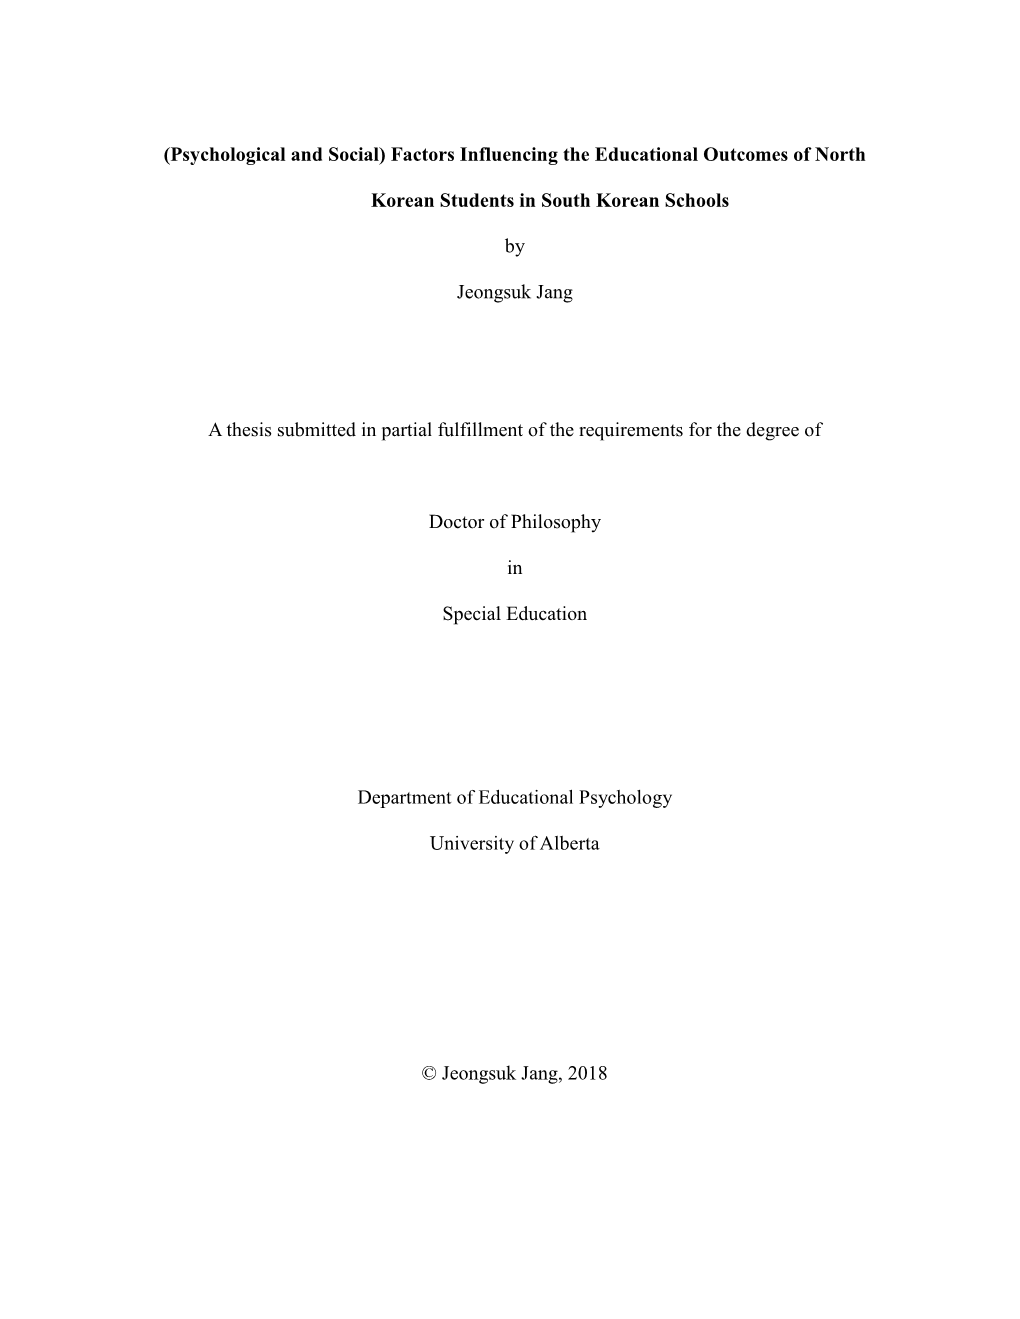 (Psychological and Social) Factors Influencing the Educational Outcomes of North Korean Students in South Korean Schools by Jeon